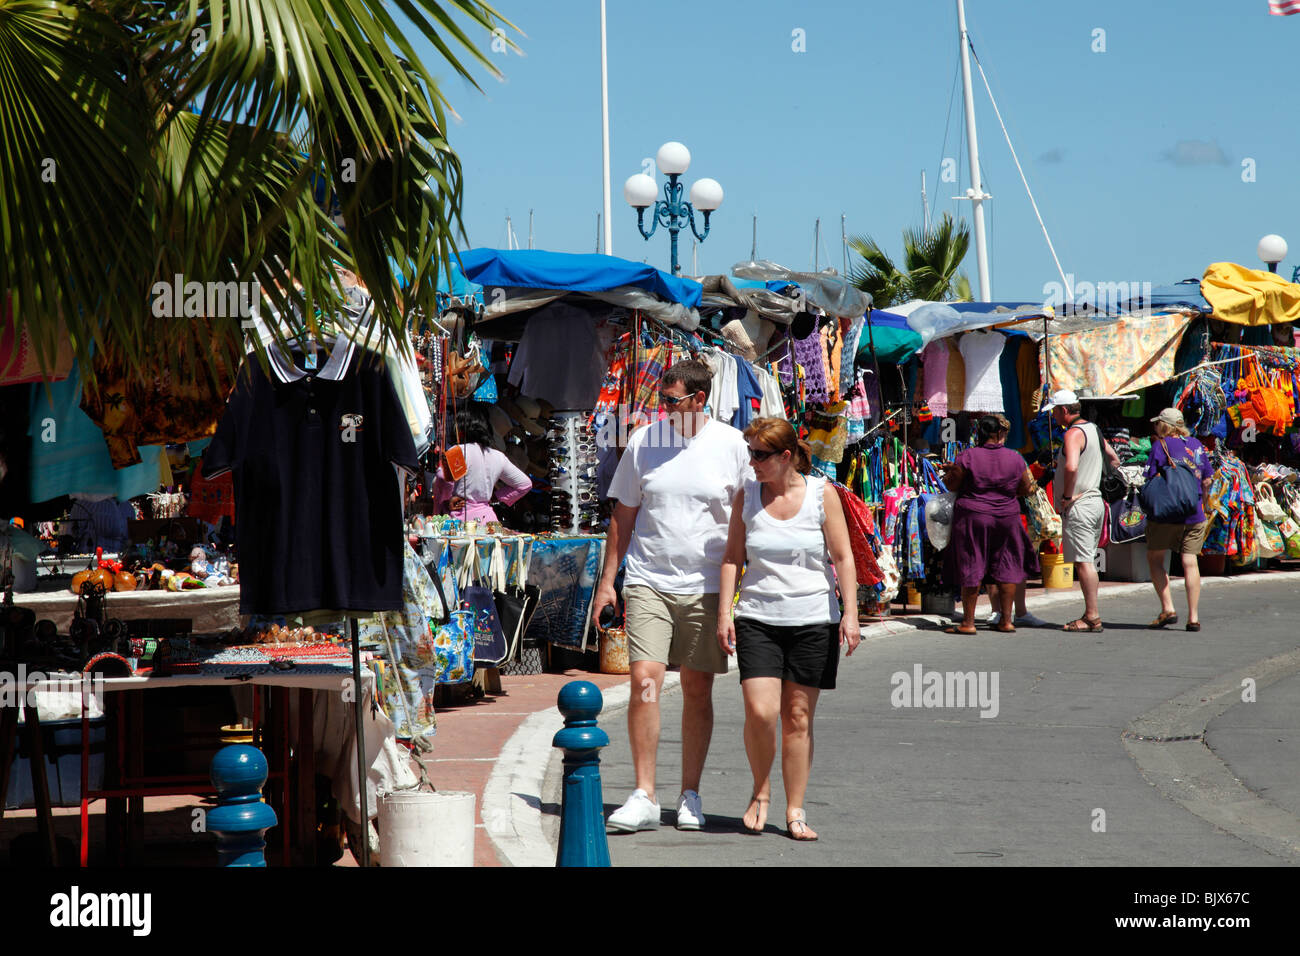 Colourful Market stalls in St.Martin, French Caribbean. Stock Photo